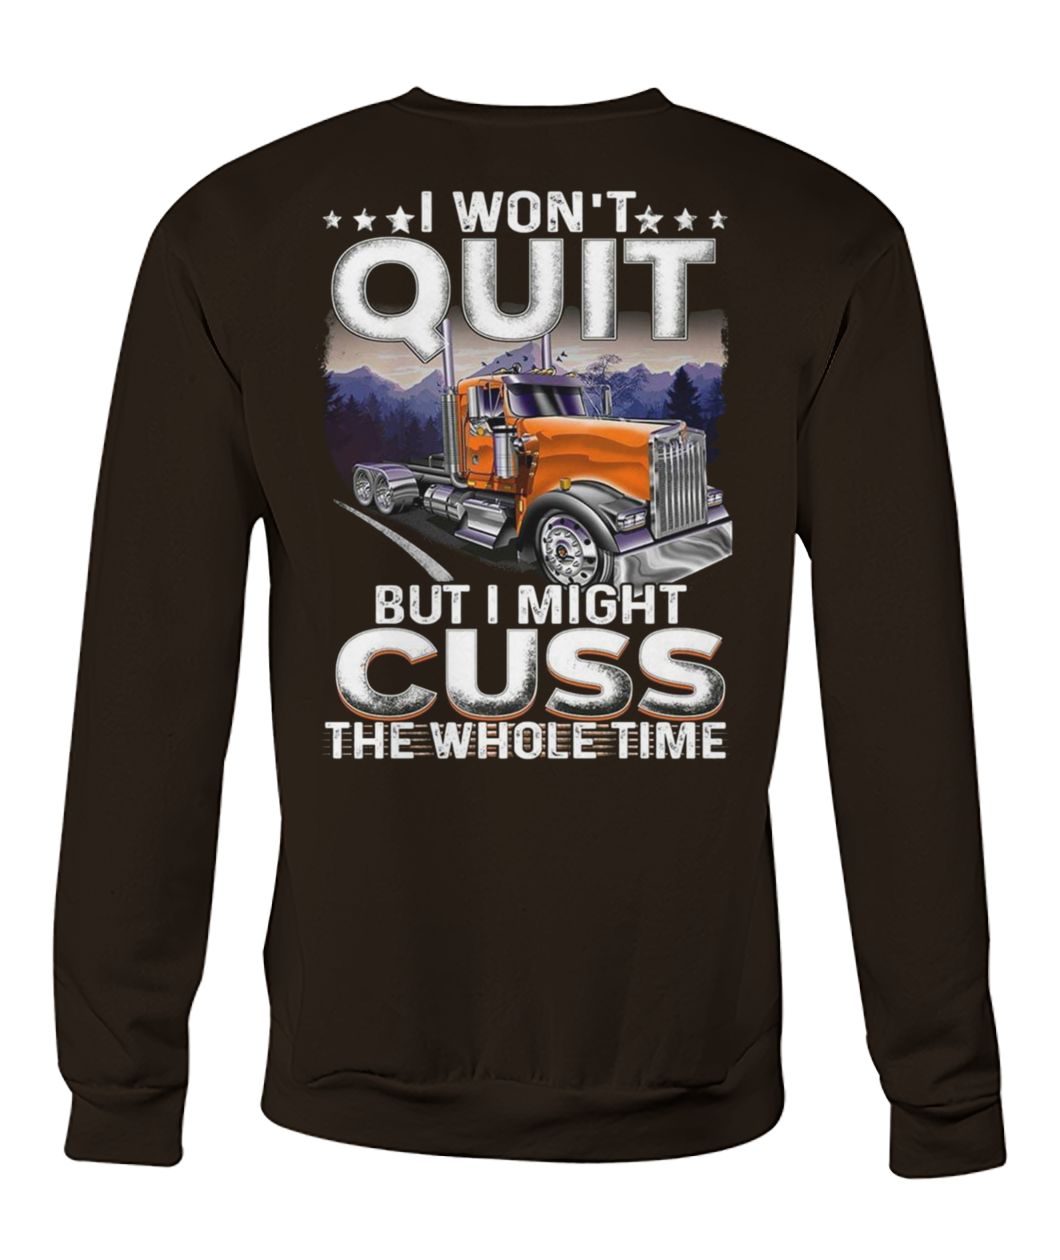 Trucker I won't quit but I might cuss the whole time crew neck sweatshirt